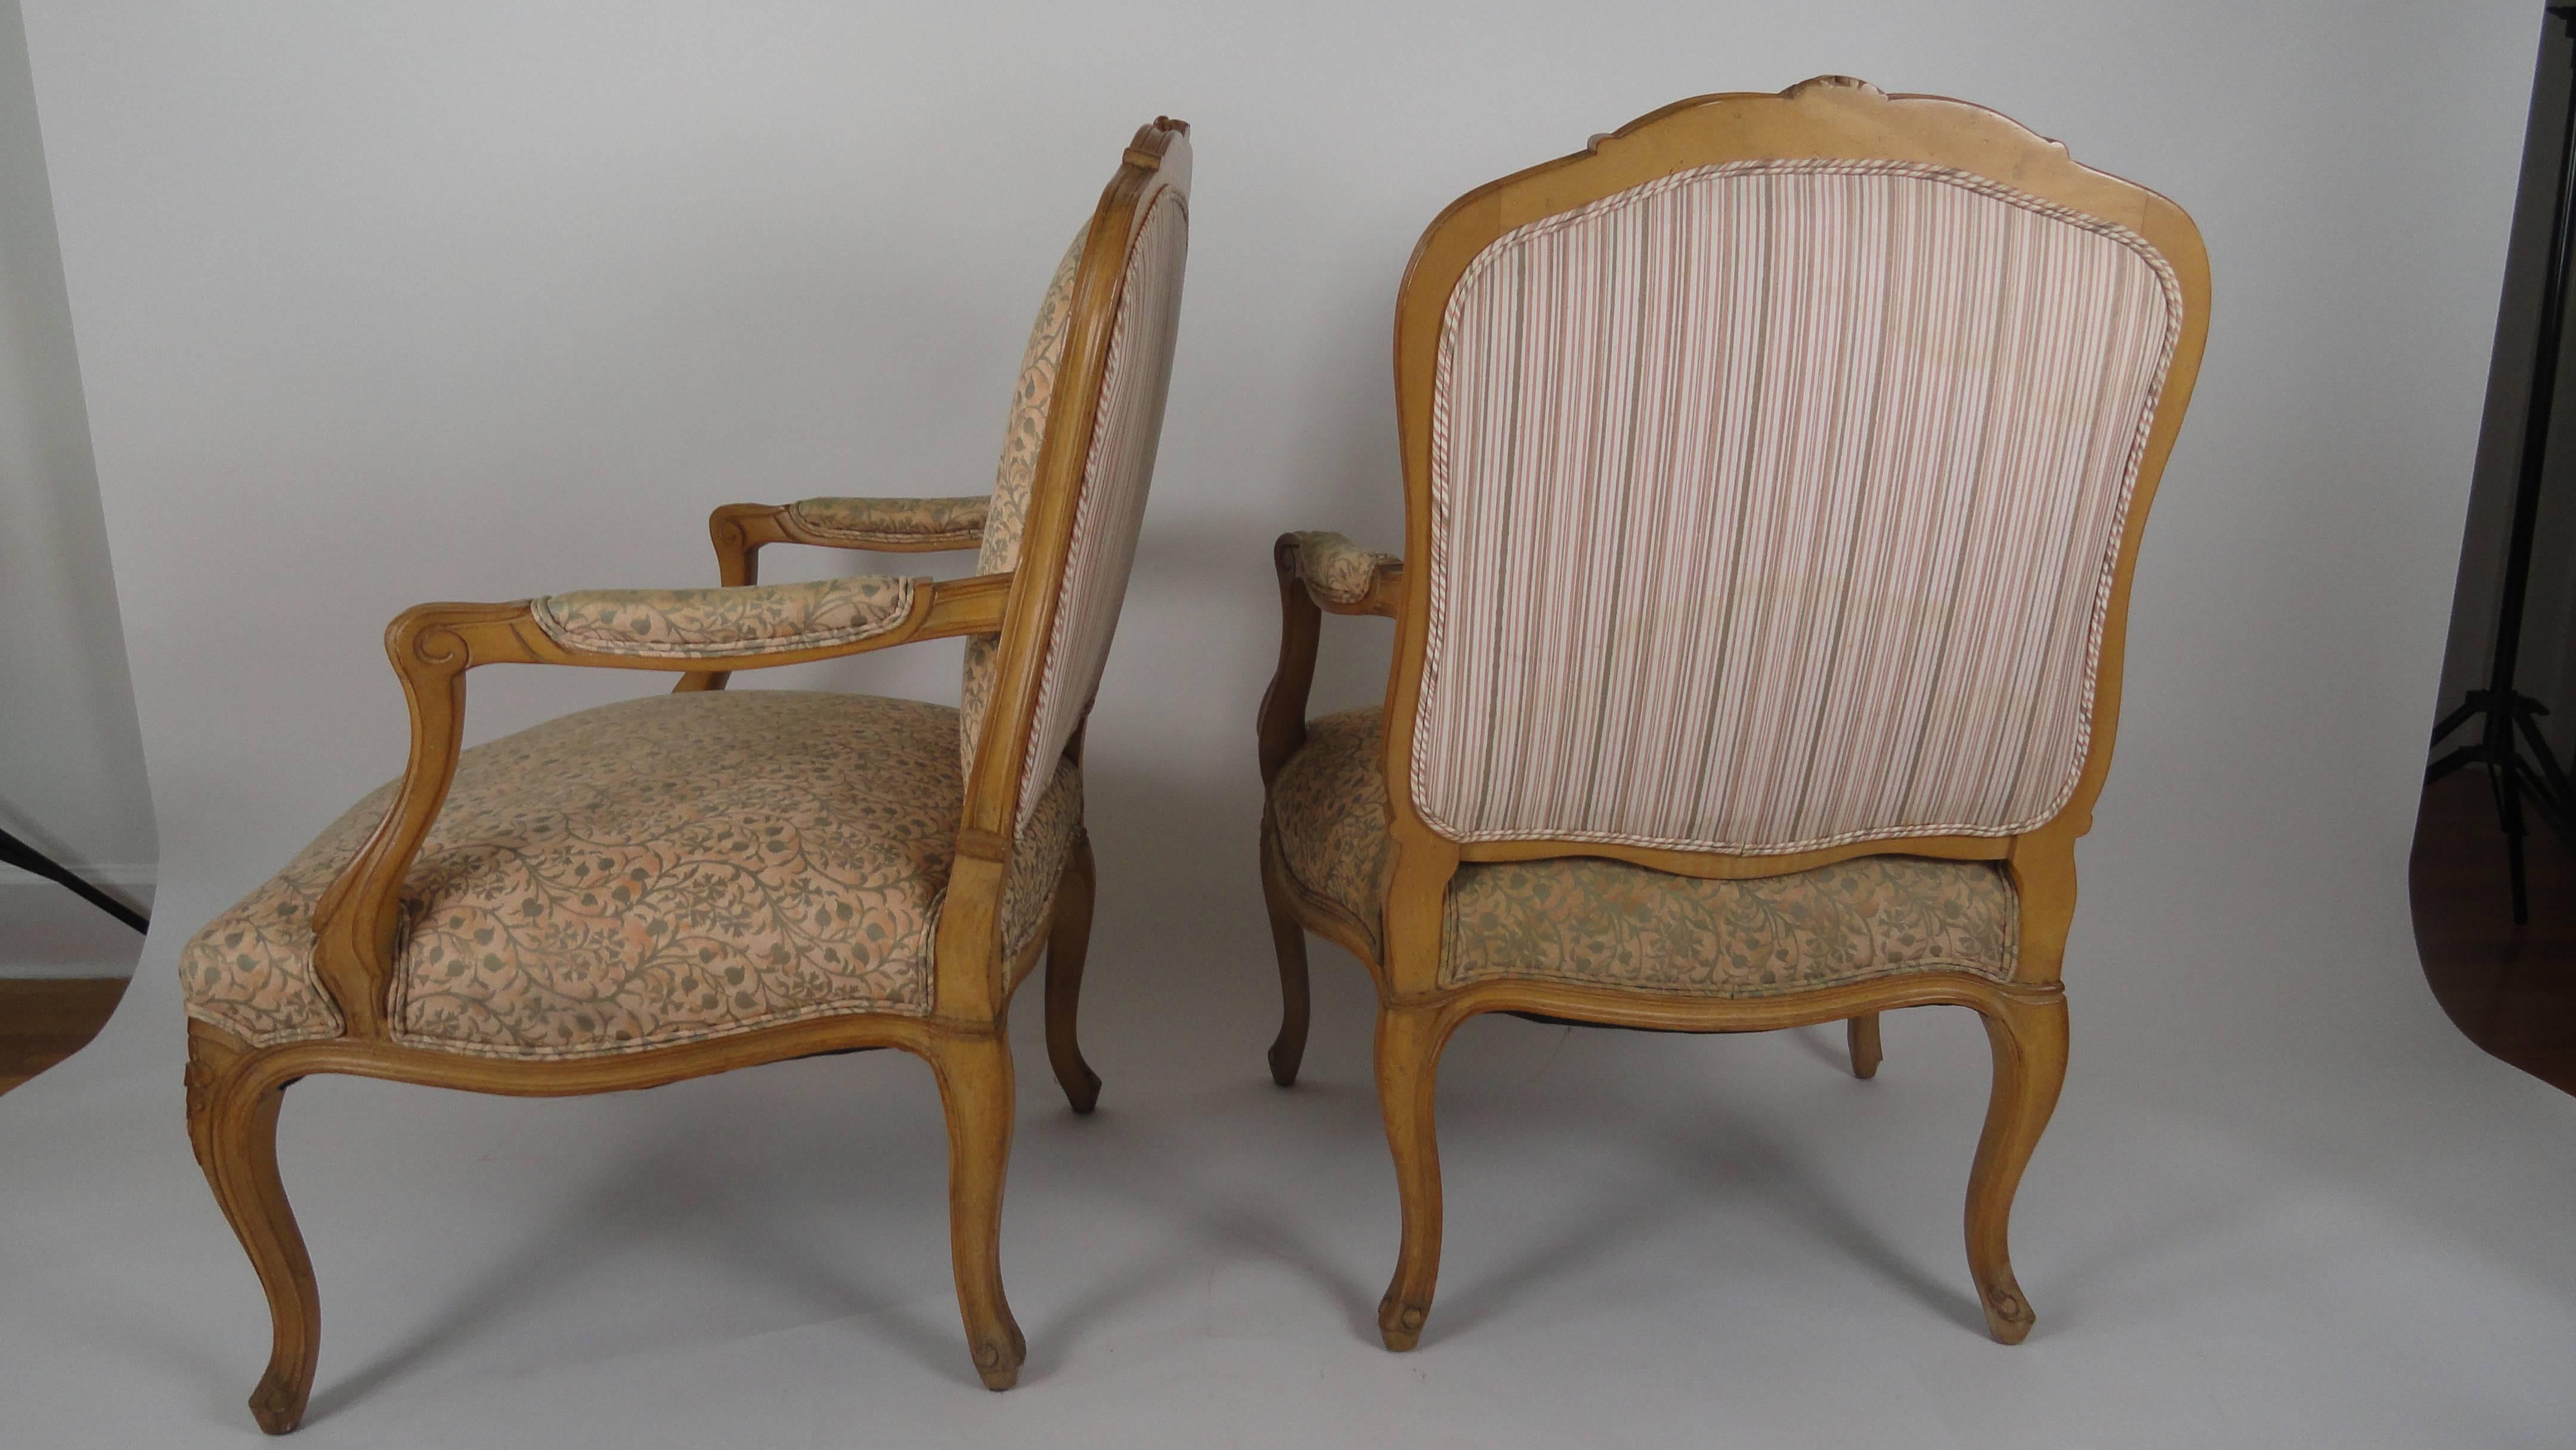 Pair of French open armchairs in the French Louis XV style. Cartouche shaped padded backs, padded down scrolled arms. Serpentine upholstered seats with a curved detail on cabriole legs. Beautiful hand carving. Covered in Fortuny.
   